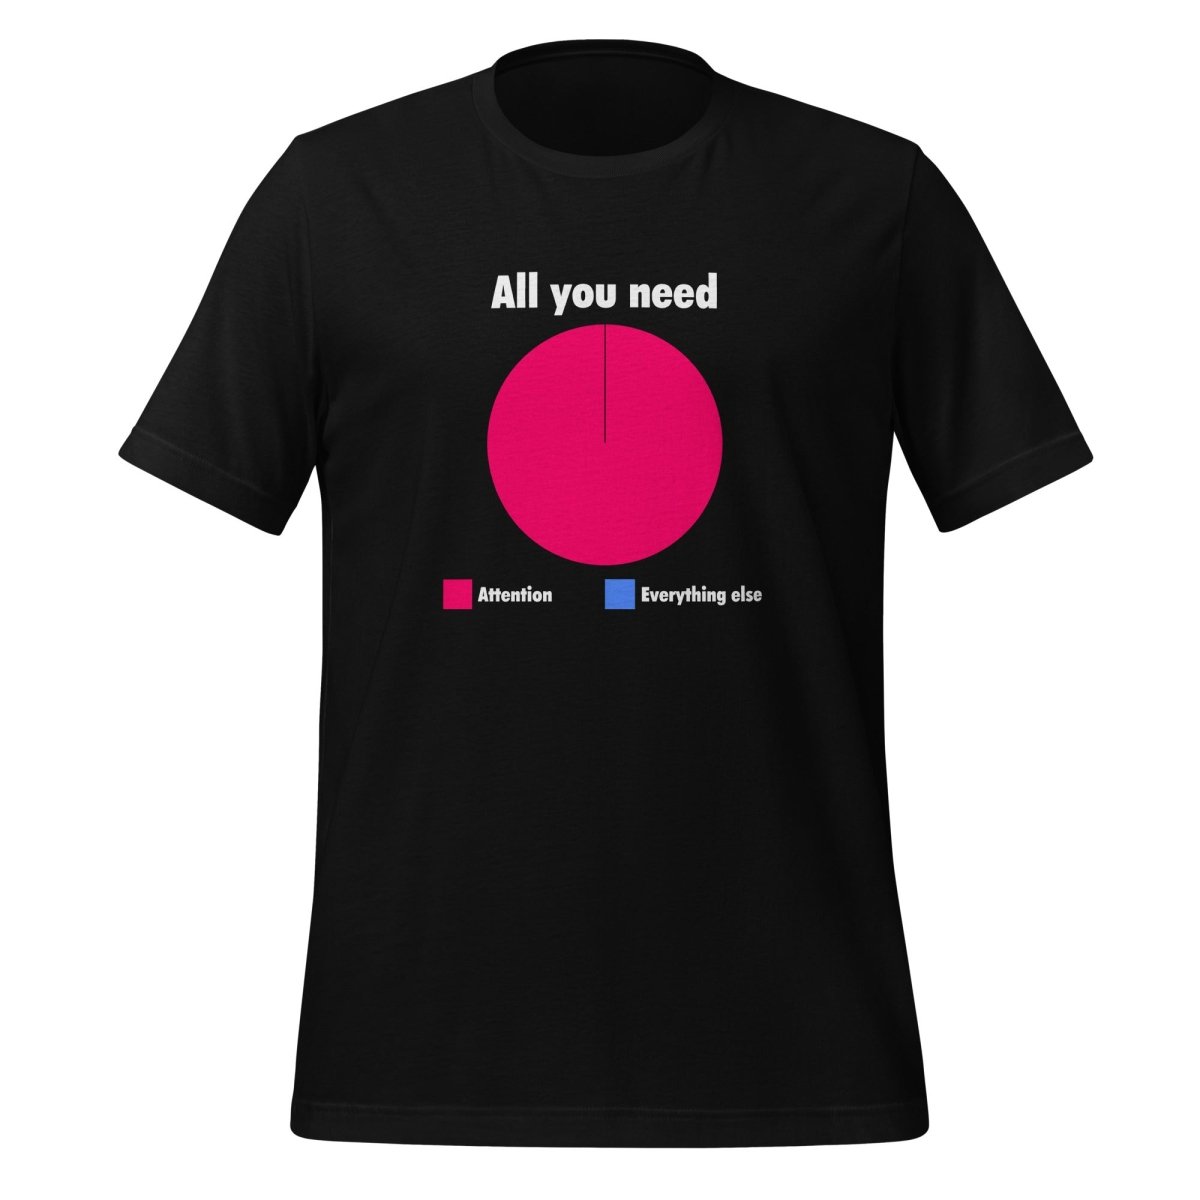 All You Need is Attention Pie Chart T - Shirt (unisex) - Black - AI Store